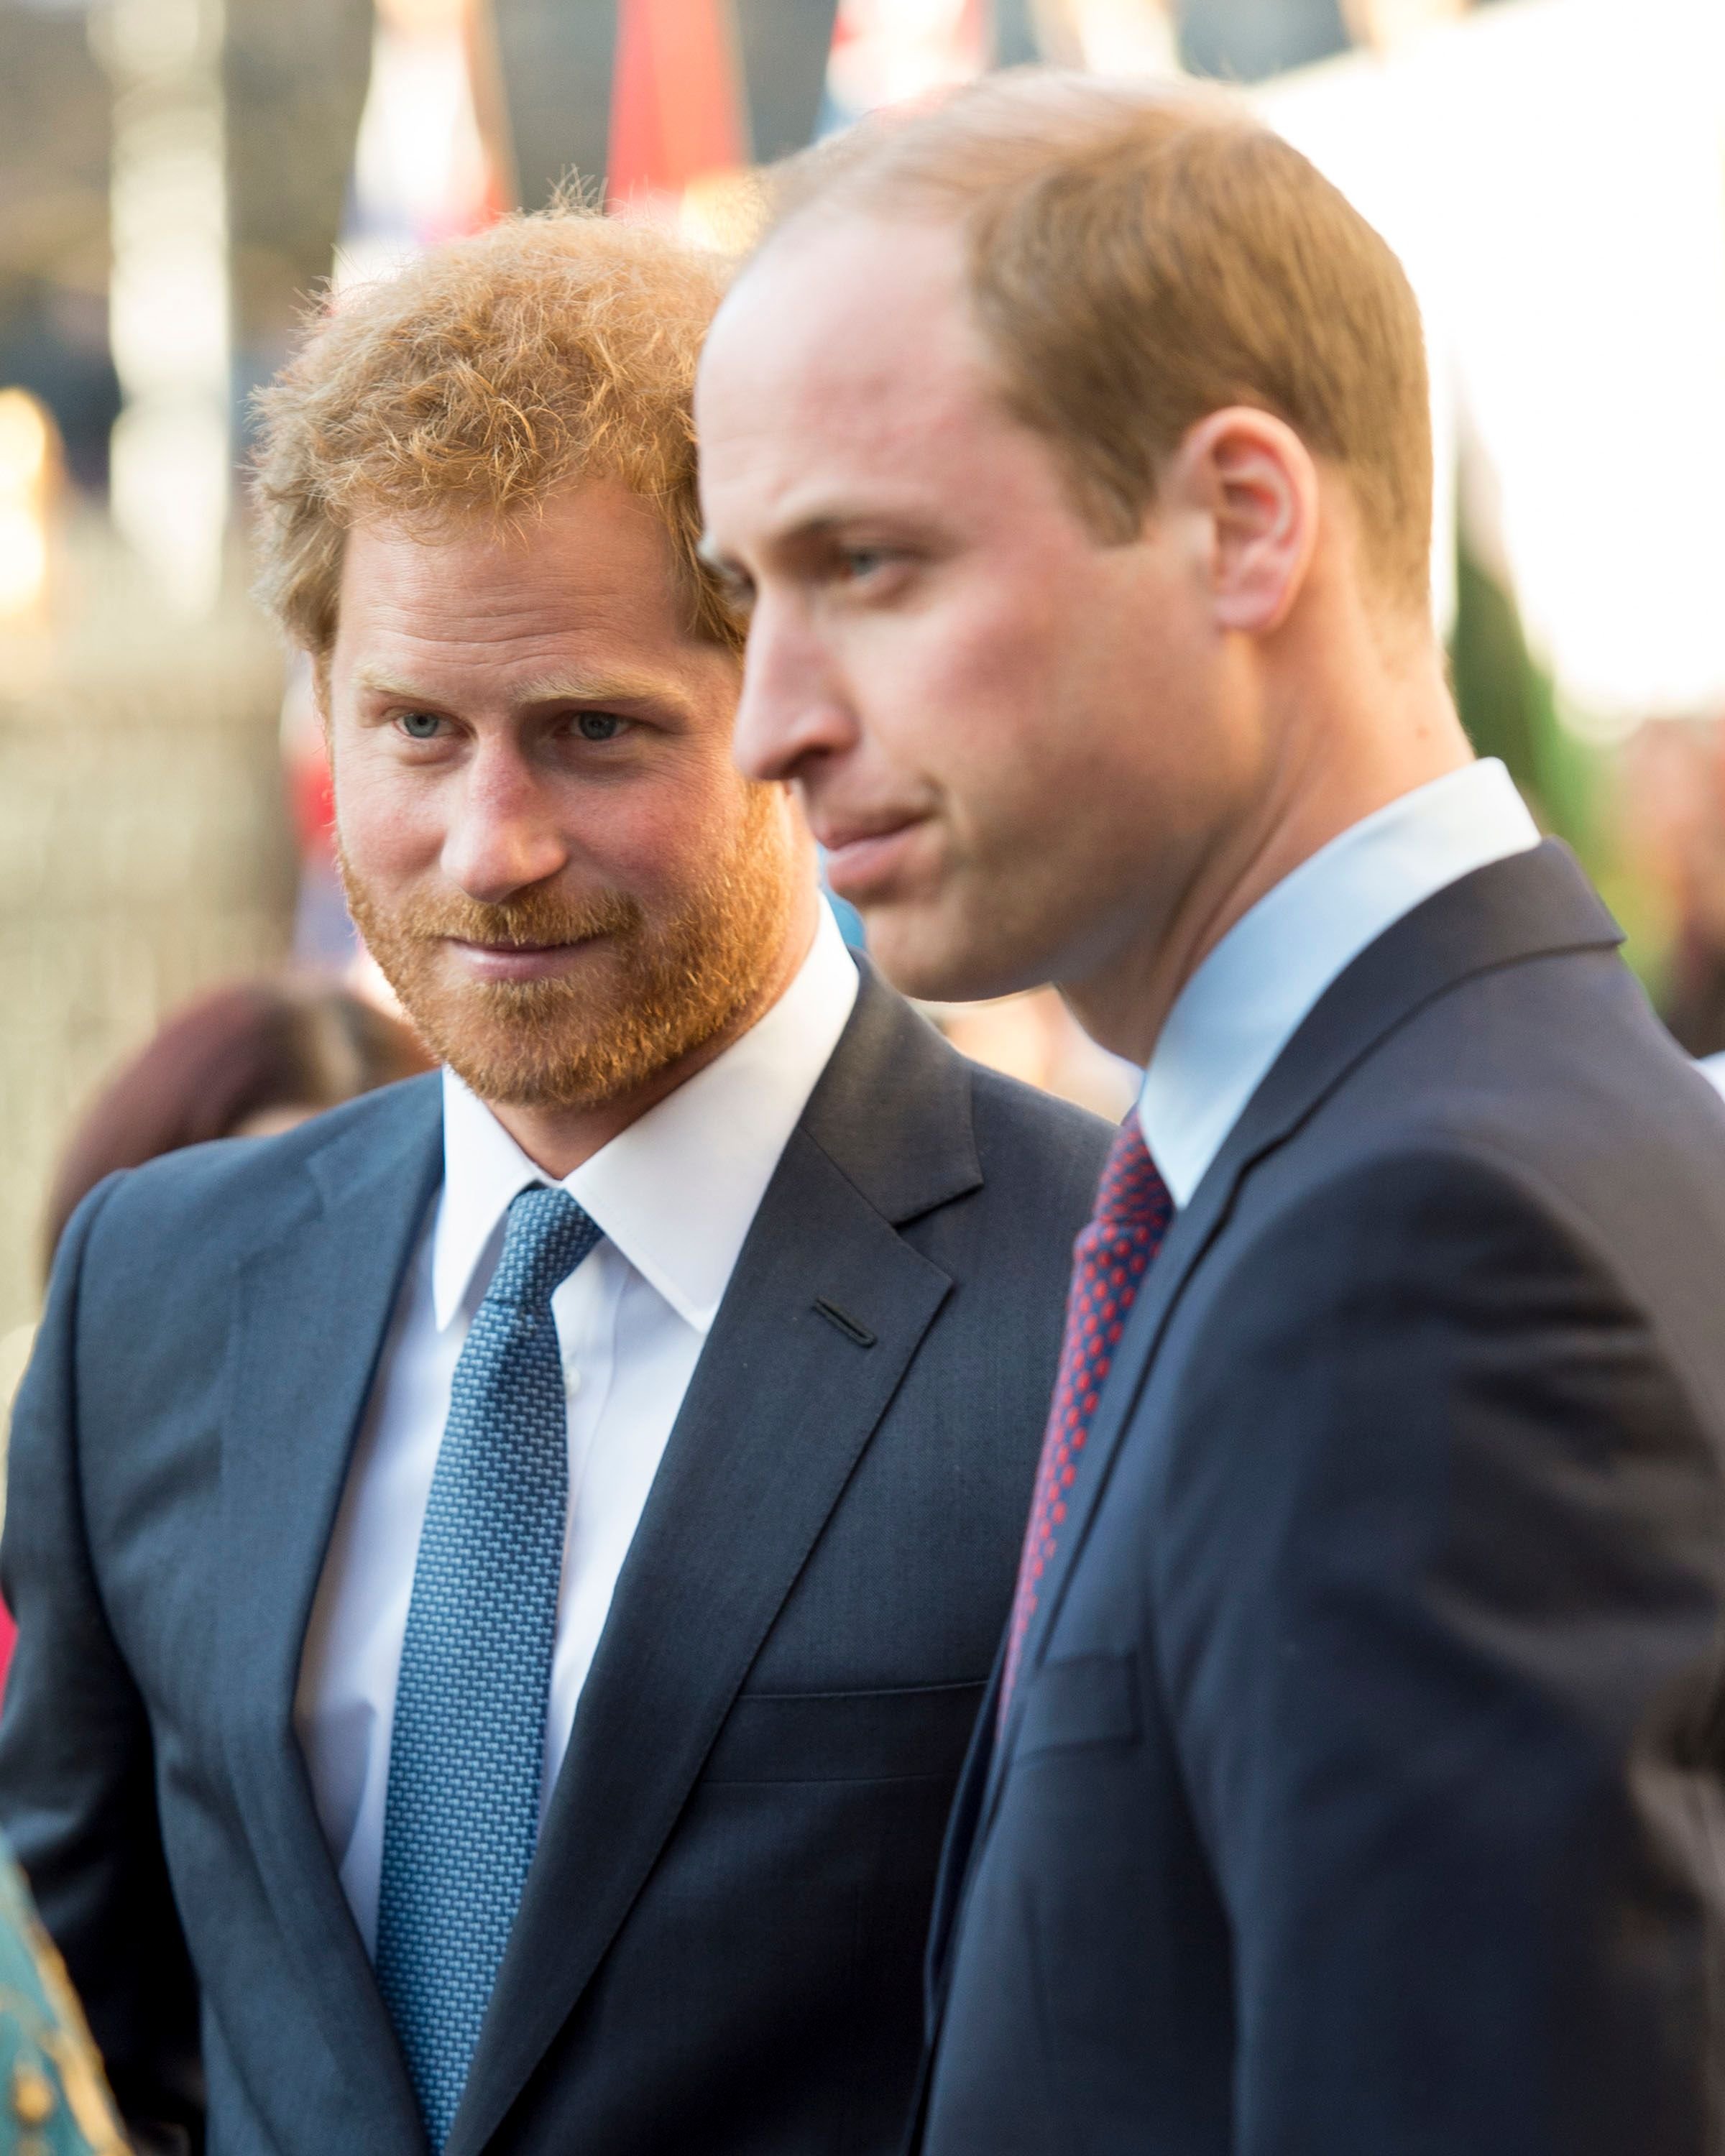 Prince Harry and Prince William at the Commonwealth Observance Day Service on March 14, 2016 in London, United Kingdom | Photo: Getty Images